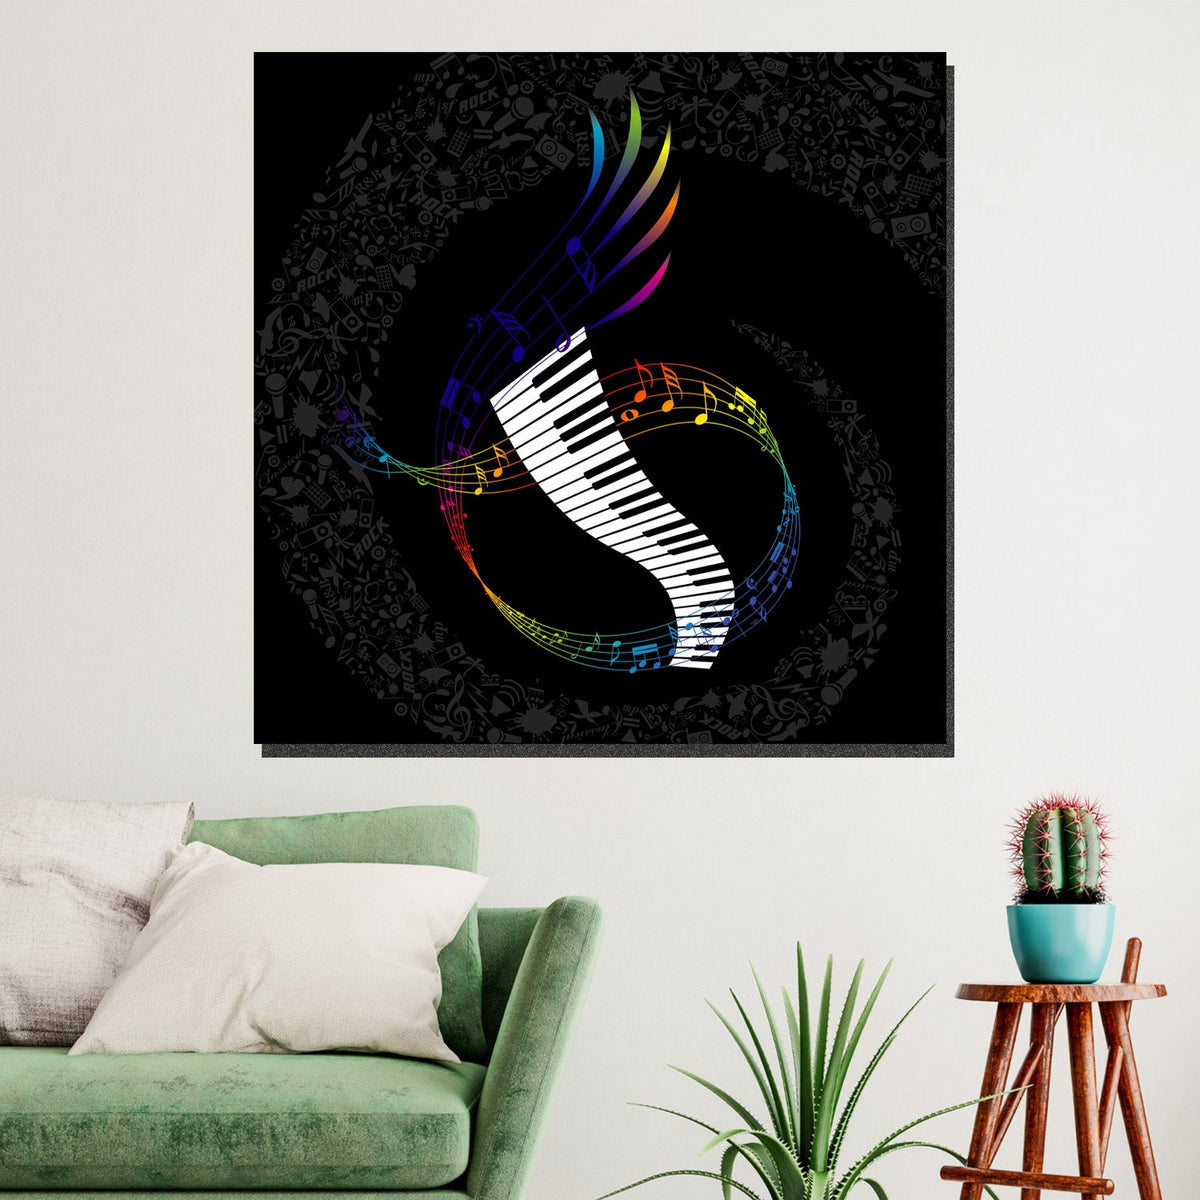 https://cdn.shopify.com/s/files/1/0387/9986/8044/products/ColourfulMusicalCollageCanvasArtprintStretched-4.jpg